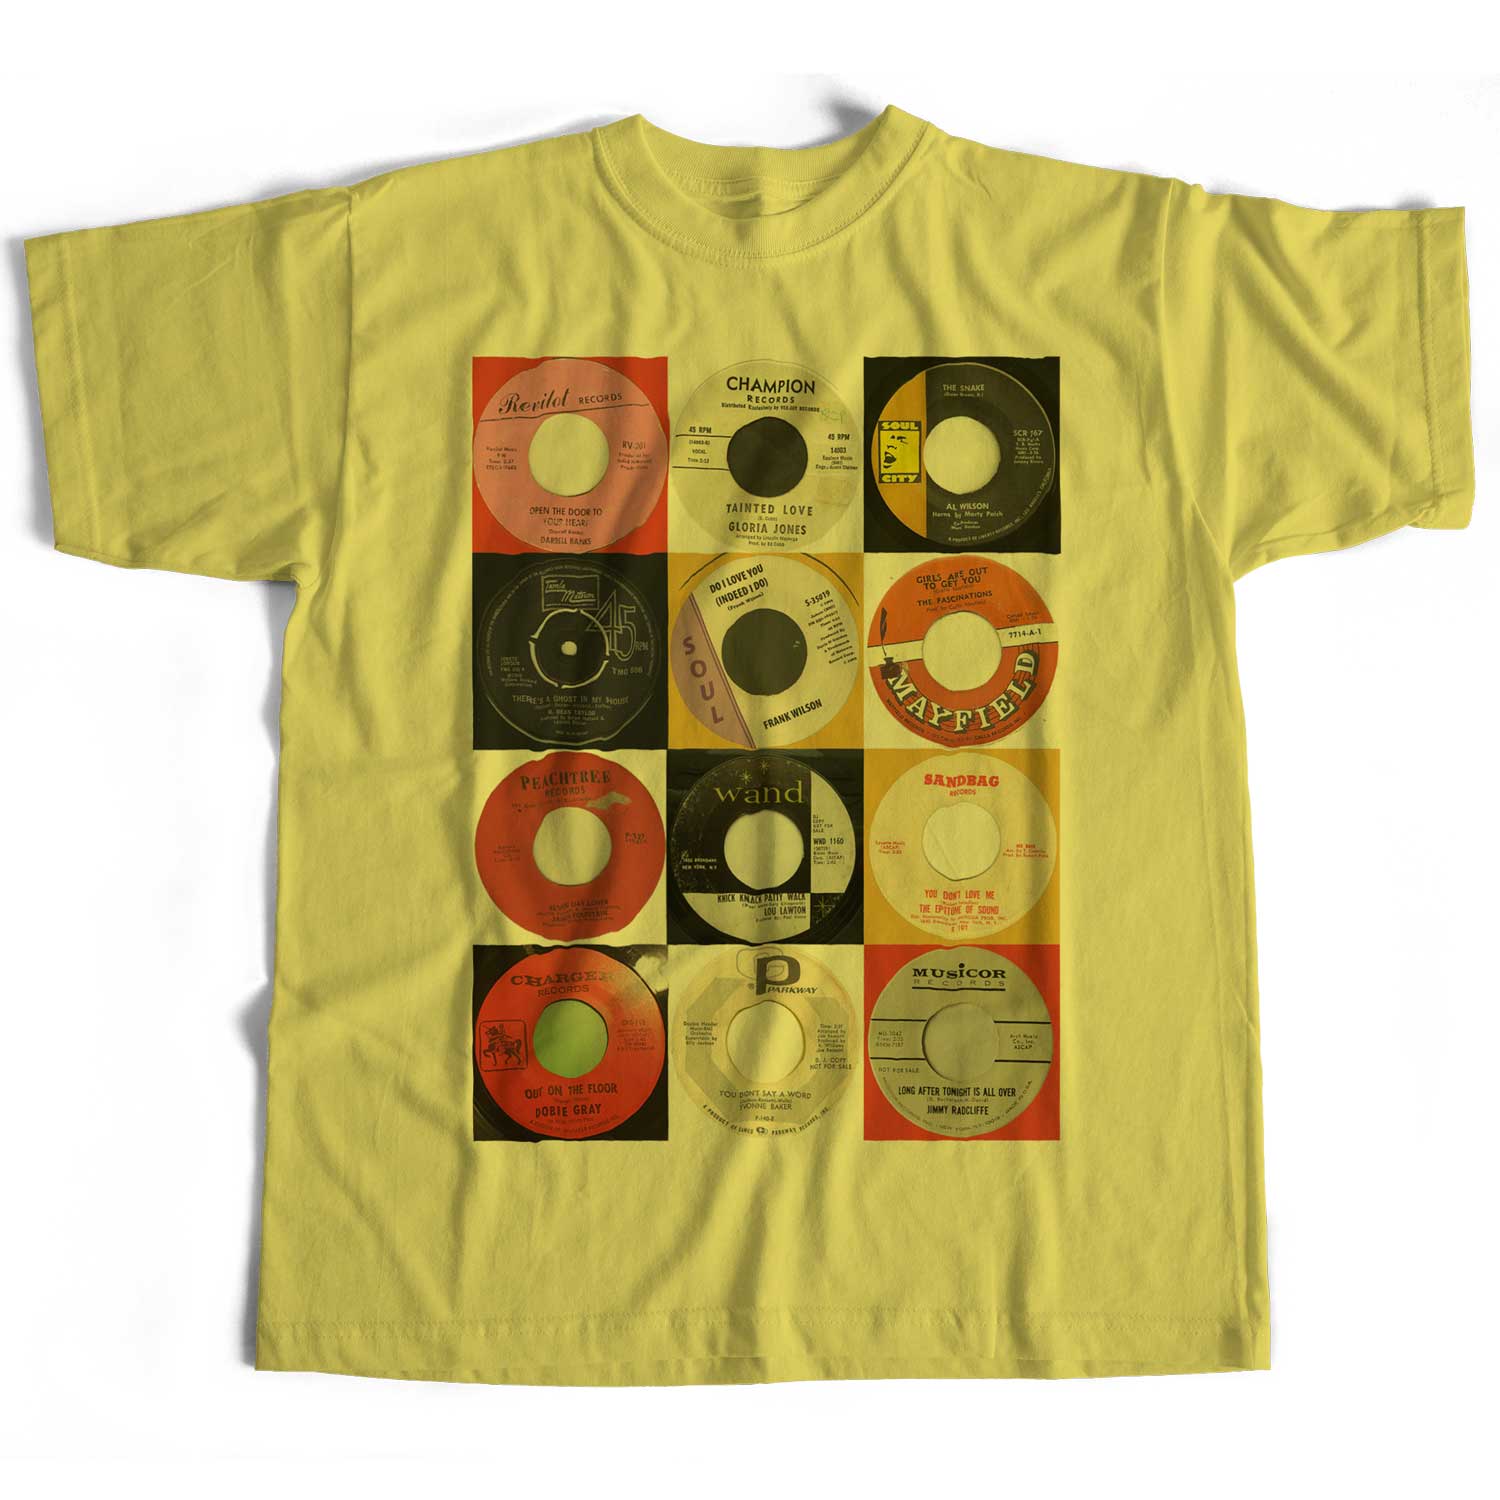 Northern Soul T Shirt - Classic 7" Singles Collection Montage Old Skool Hooligans